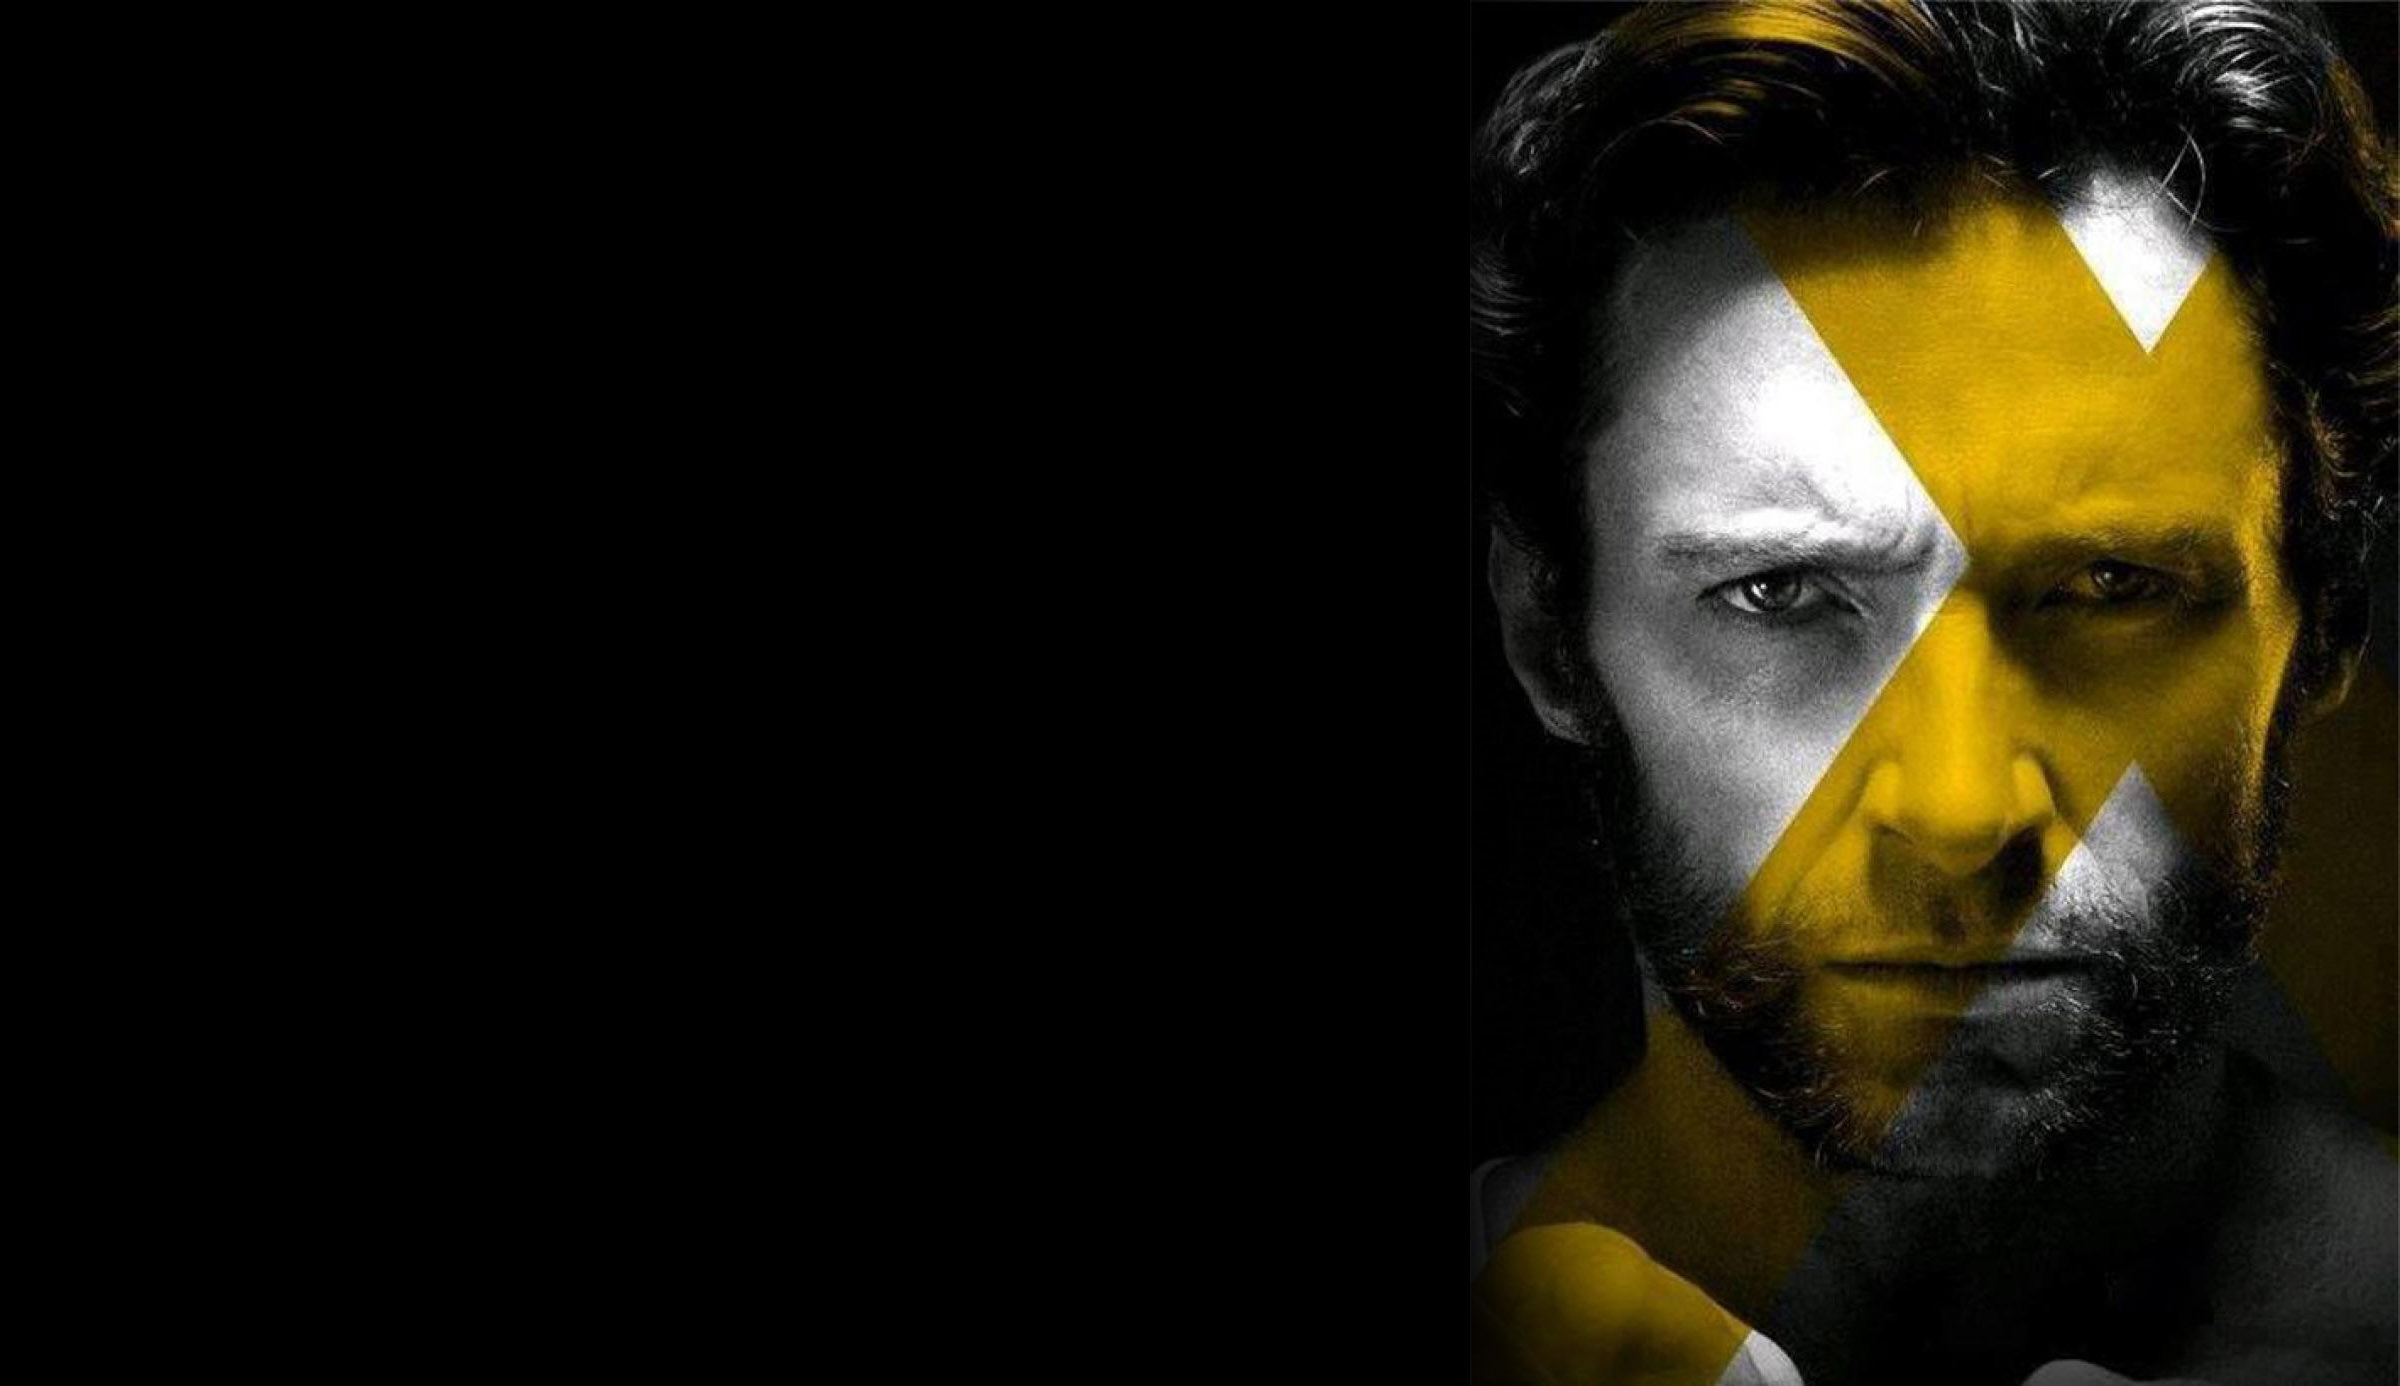 Wolverine In 2014 X-men Days Of Future Past Hd Poster - X Men Days Of Future Past Poster - HD Wallpaper 